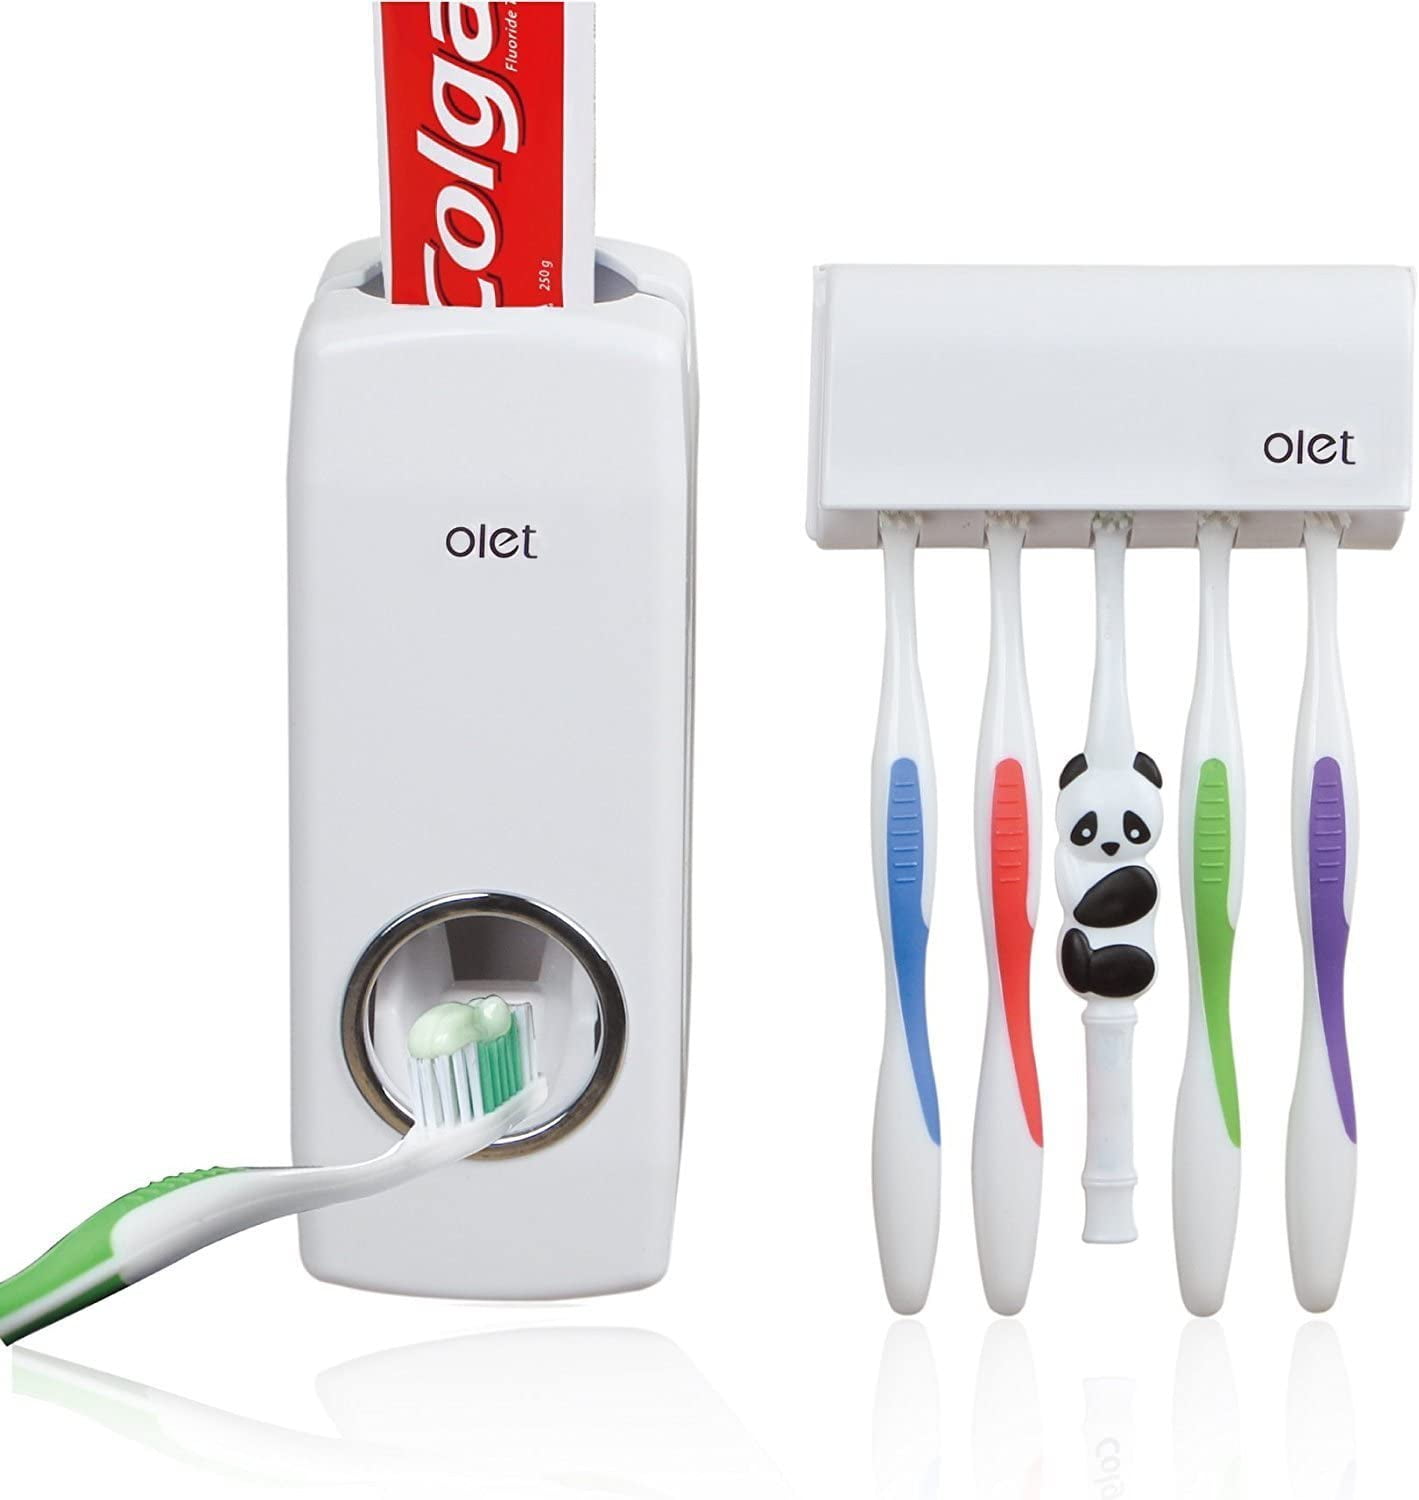 5 Toothbrush Holder 1 Set Tooth Brush Holder Automatic Toothpaste Dispenser 